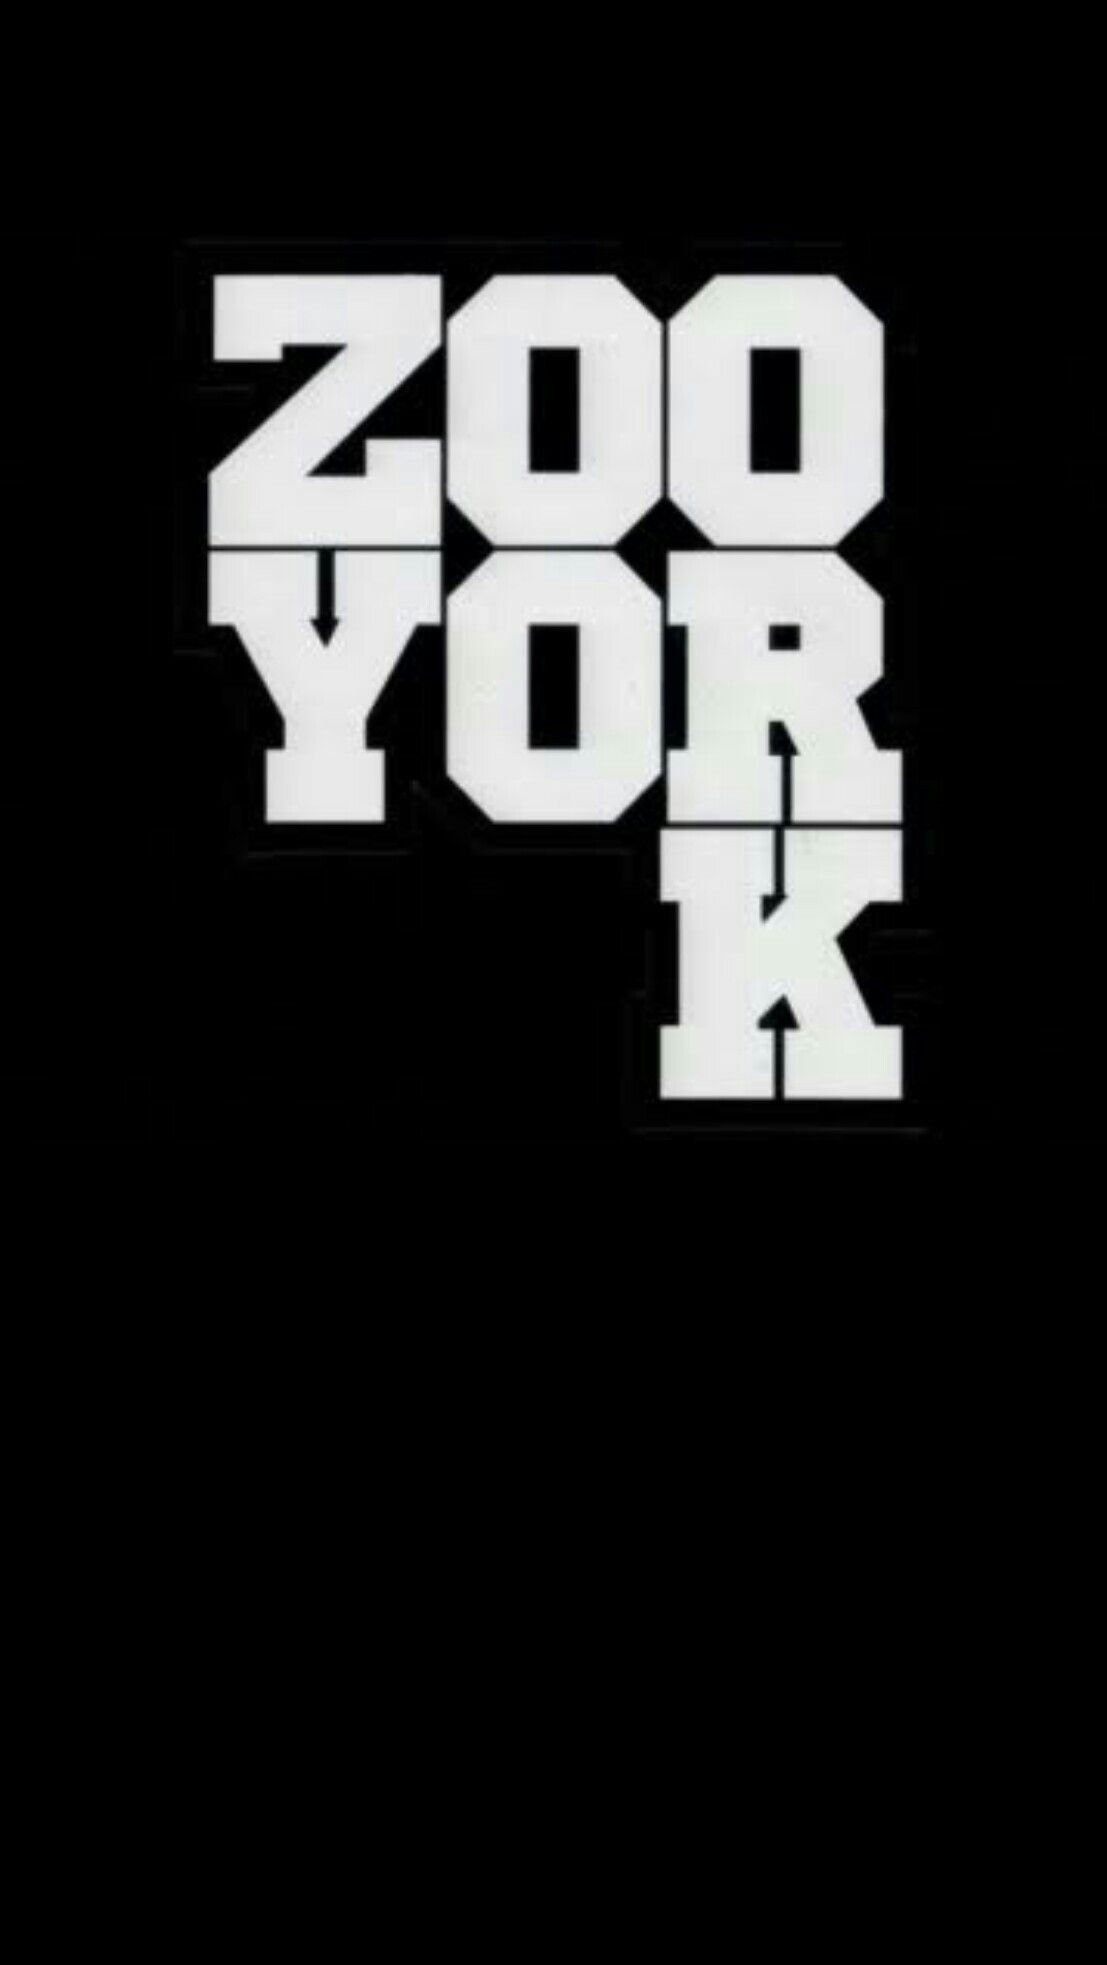 Related Wallpapers - - Zoo York Wallpaper Iphone , HD Wallpaper & Backgrounds